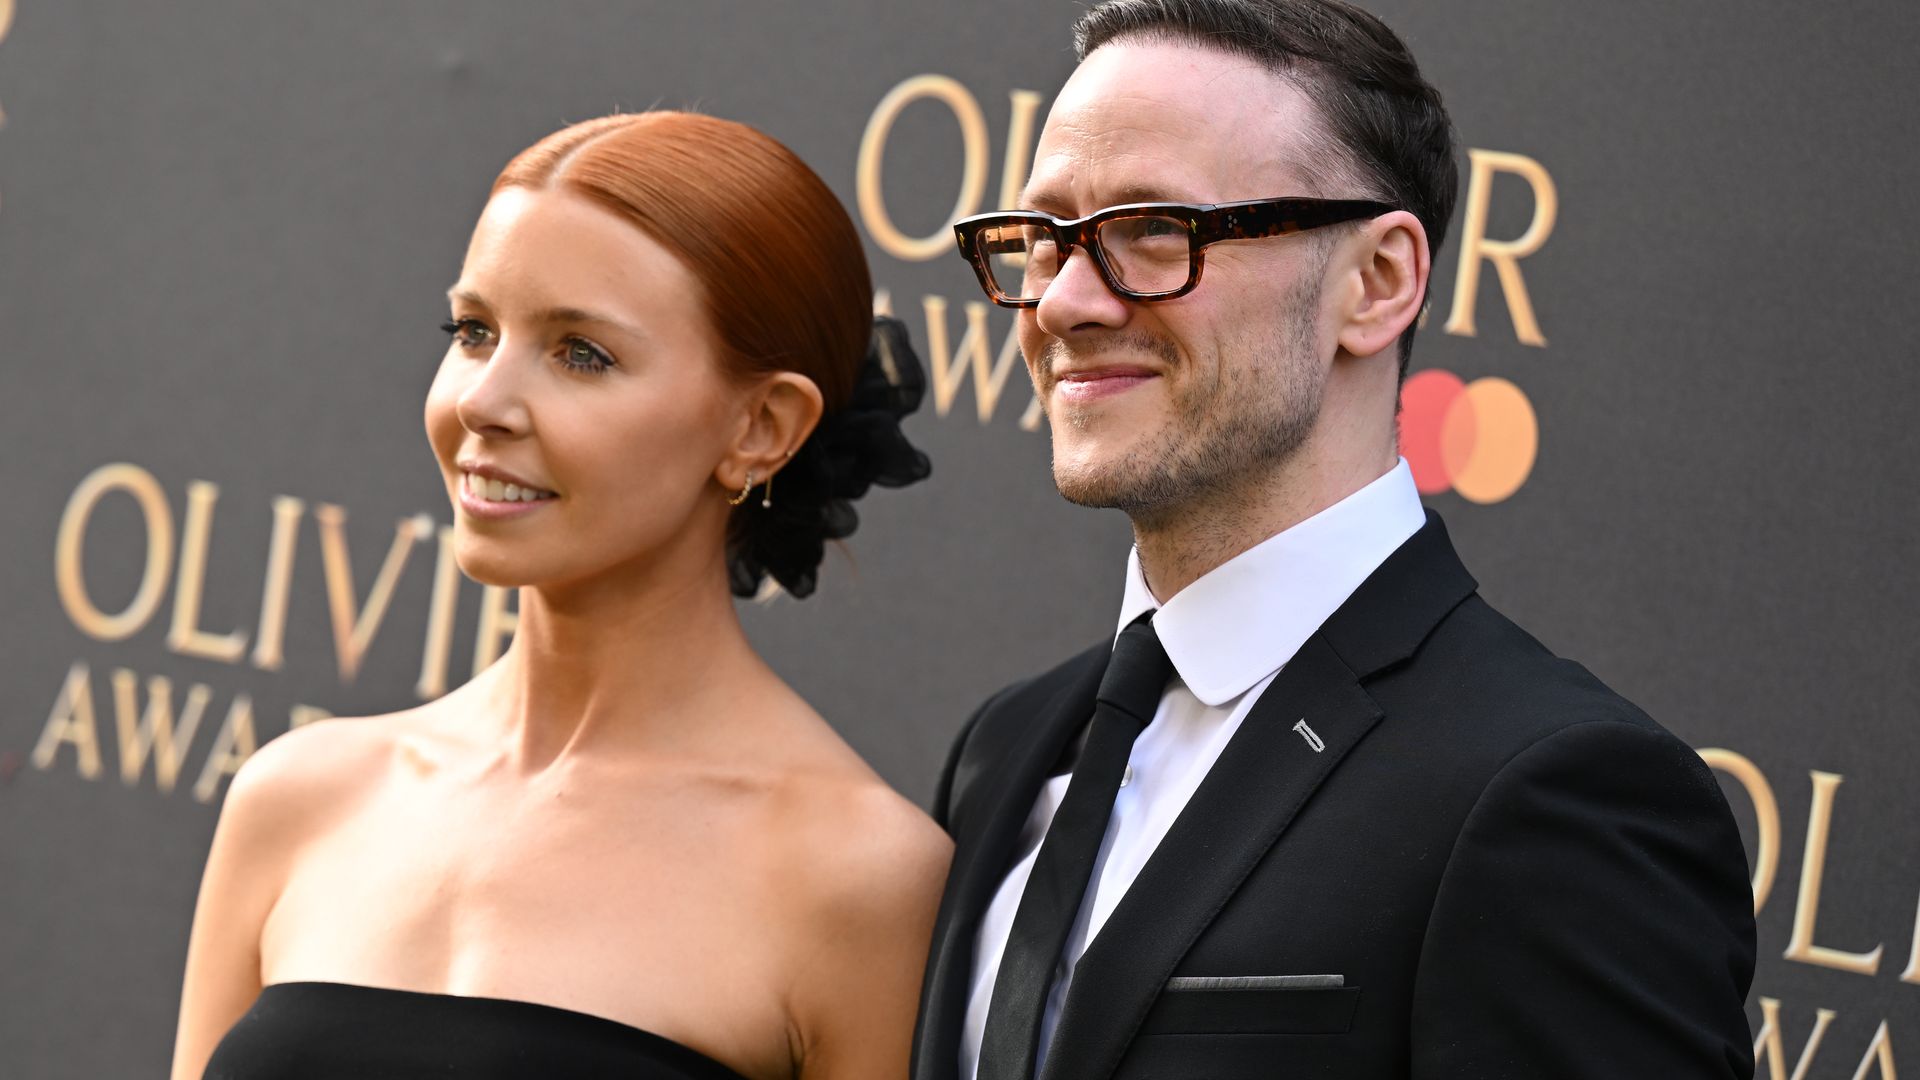 Stacey Dooley and Kevin Clifton at Olivier Awards